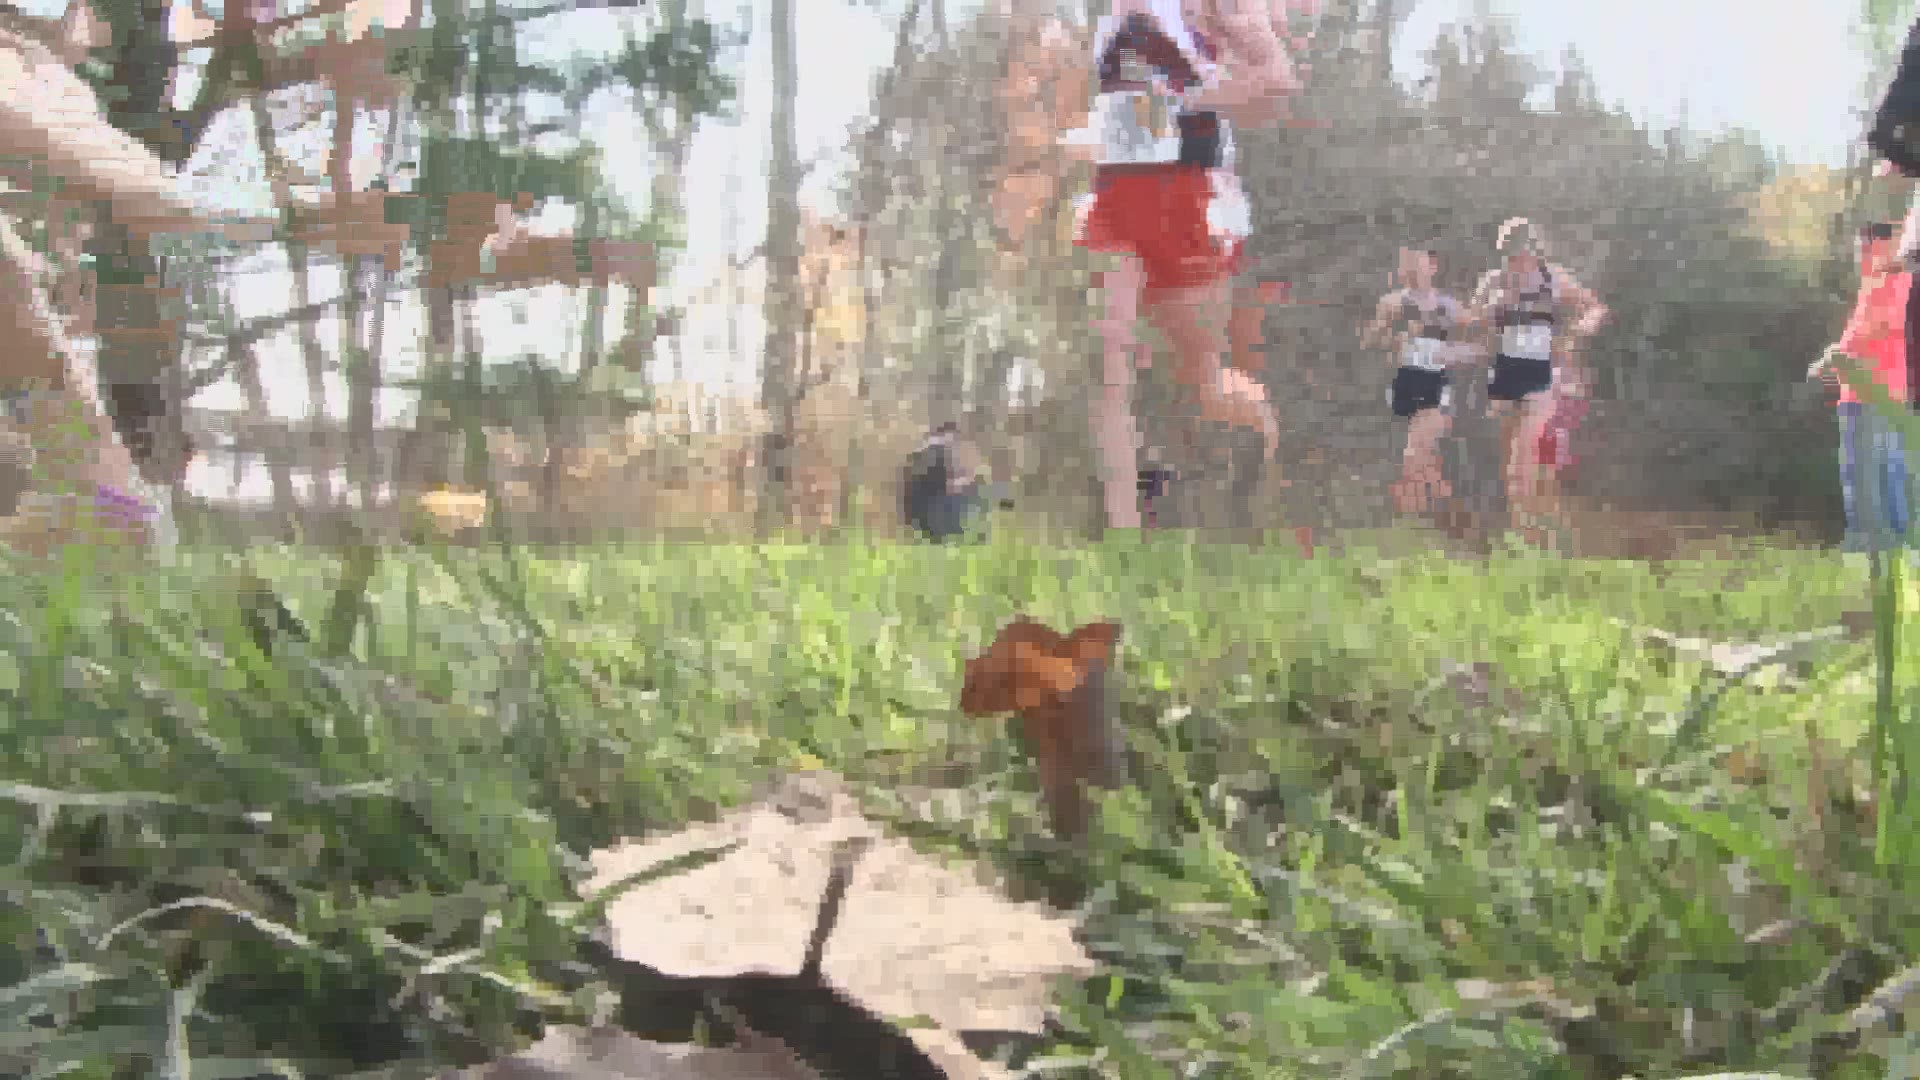 The state championships in high school cross country have been canceled due to Covid 19risk